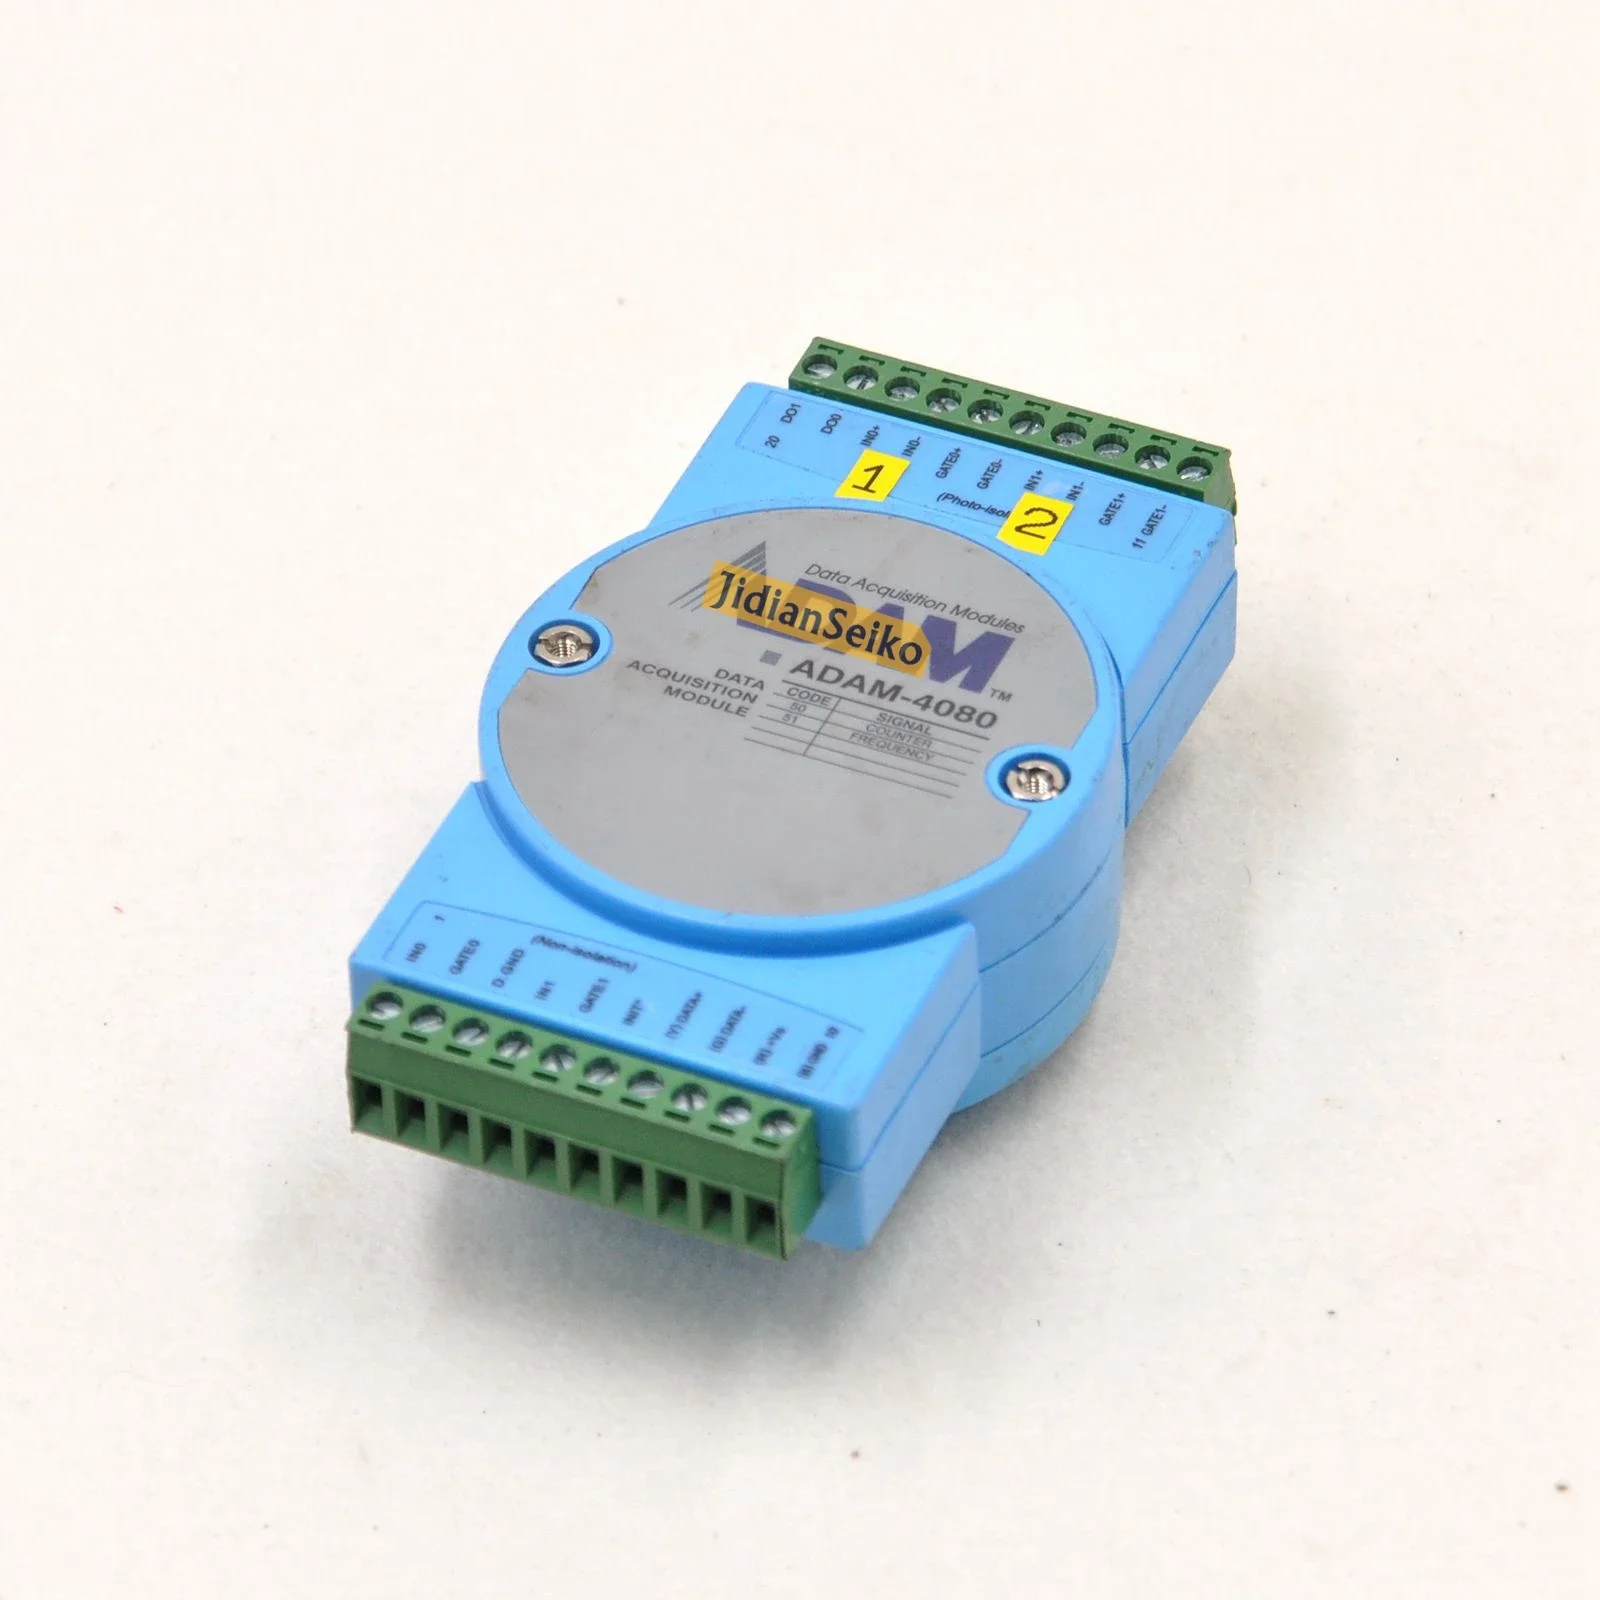 ad7606 module multi channel ad data acquisition module 16 bit adc 8 channel synchronization sampling frequency 200khz ADAM-4080 Two Channel 32-Bit Counting Frequency Module Used